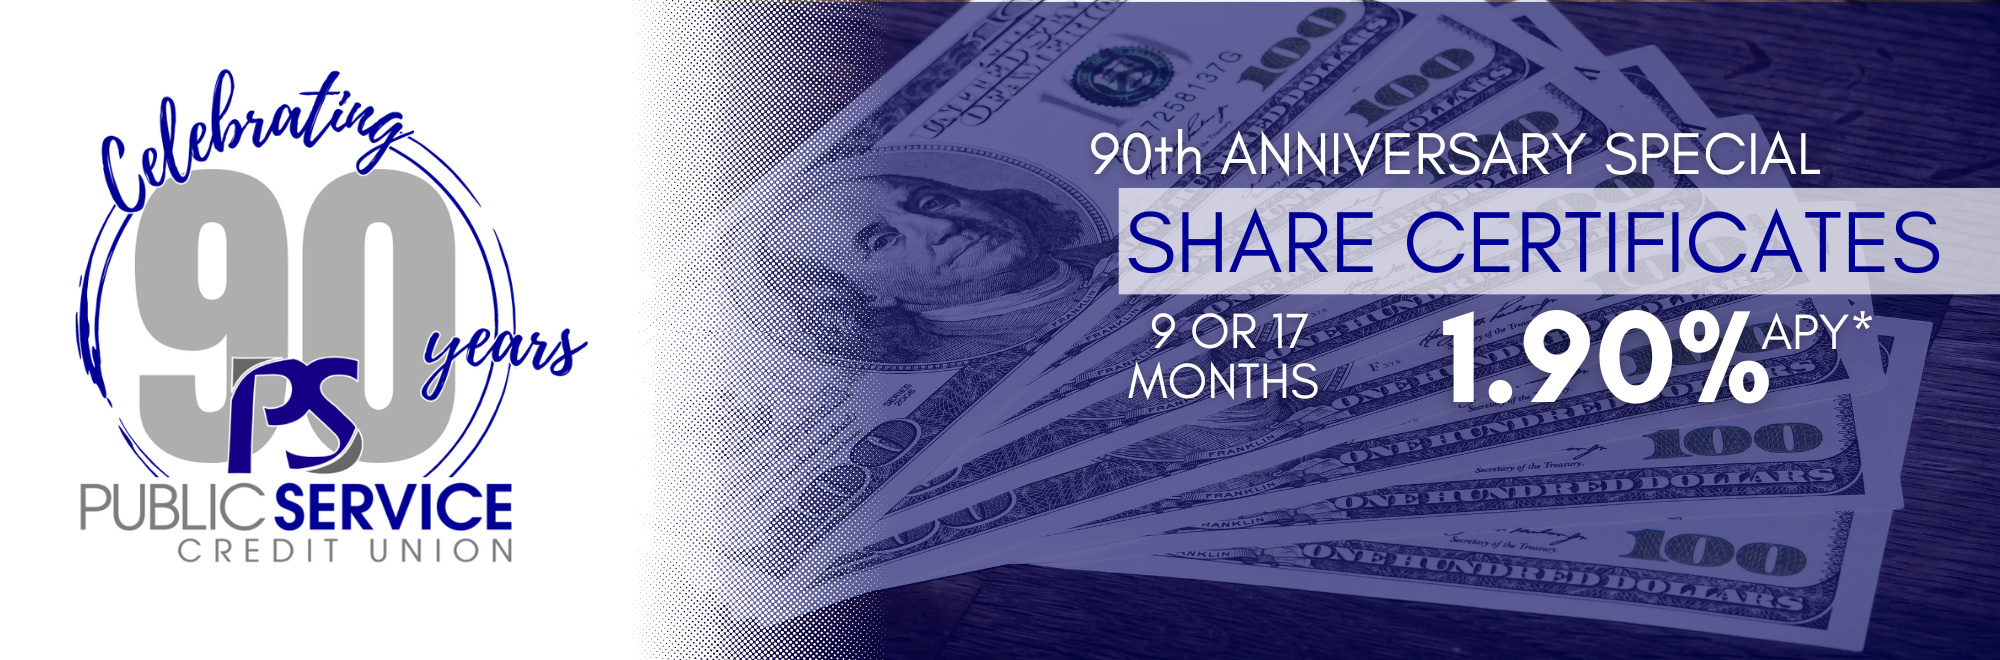 90th anniversary share certificate special 9 or 17 months 1.90%APY*